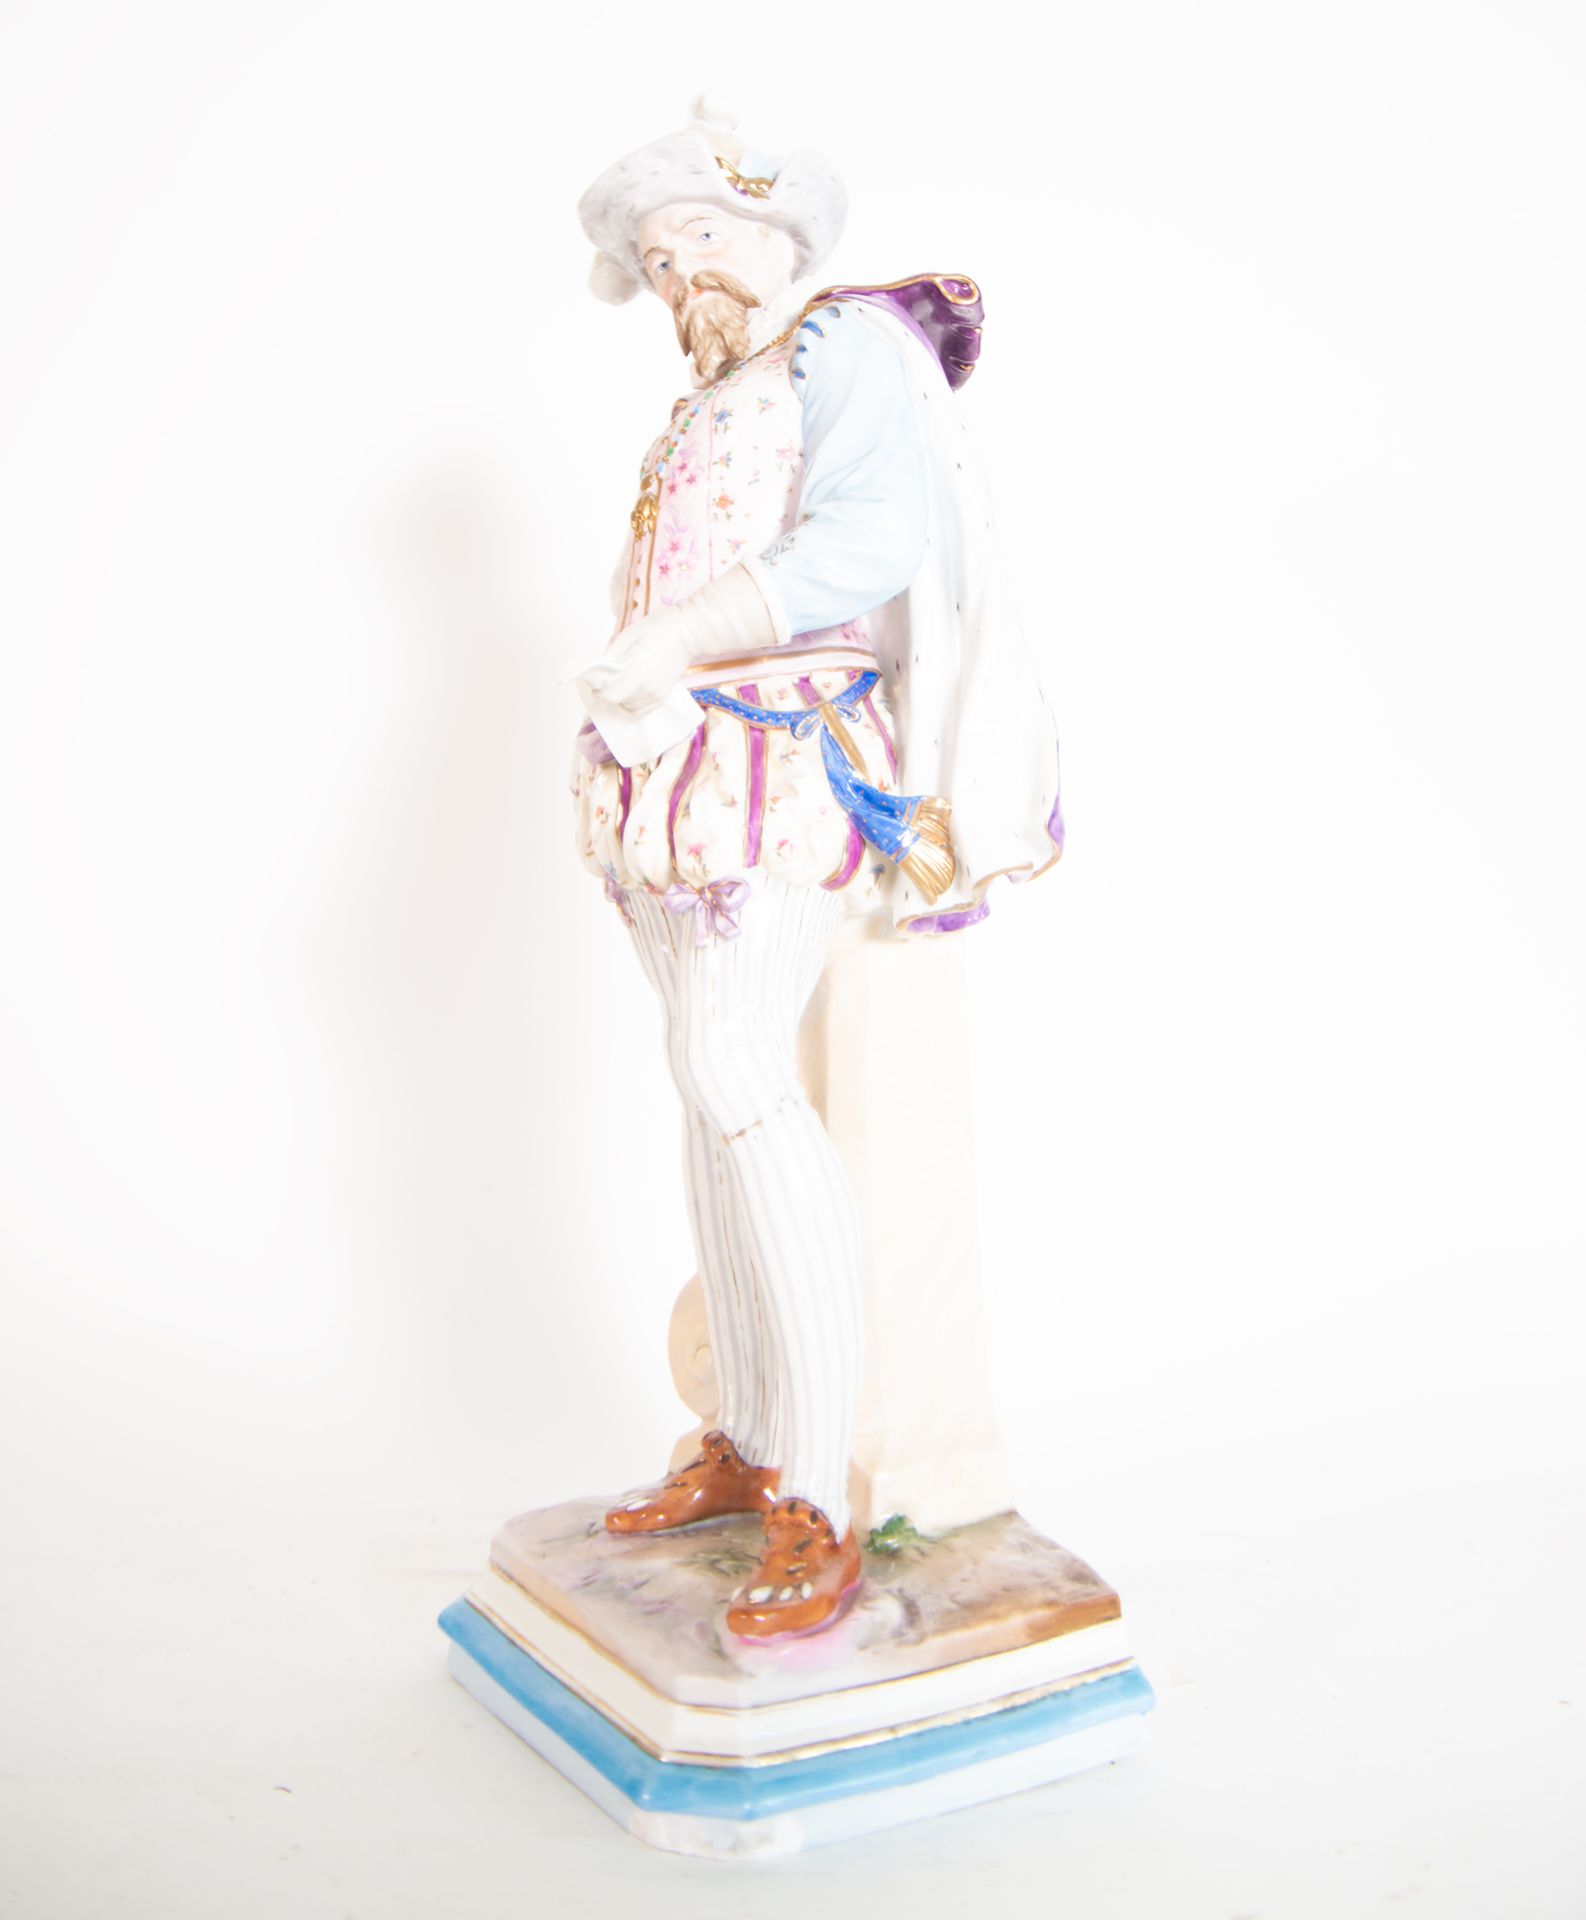 Lady and Gentleman in Polychrome Biscuit Porcelain, Vienna, 19th - 20th centuries - Image 3 of 8